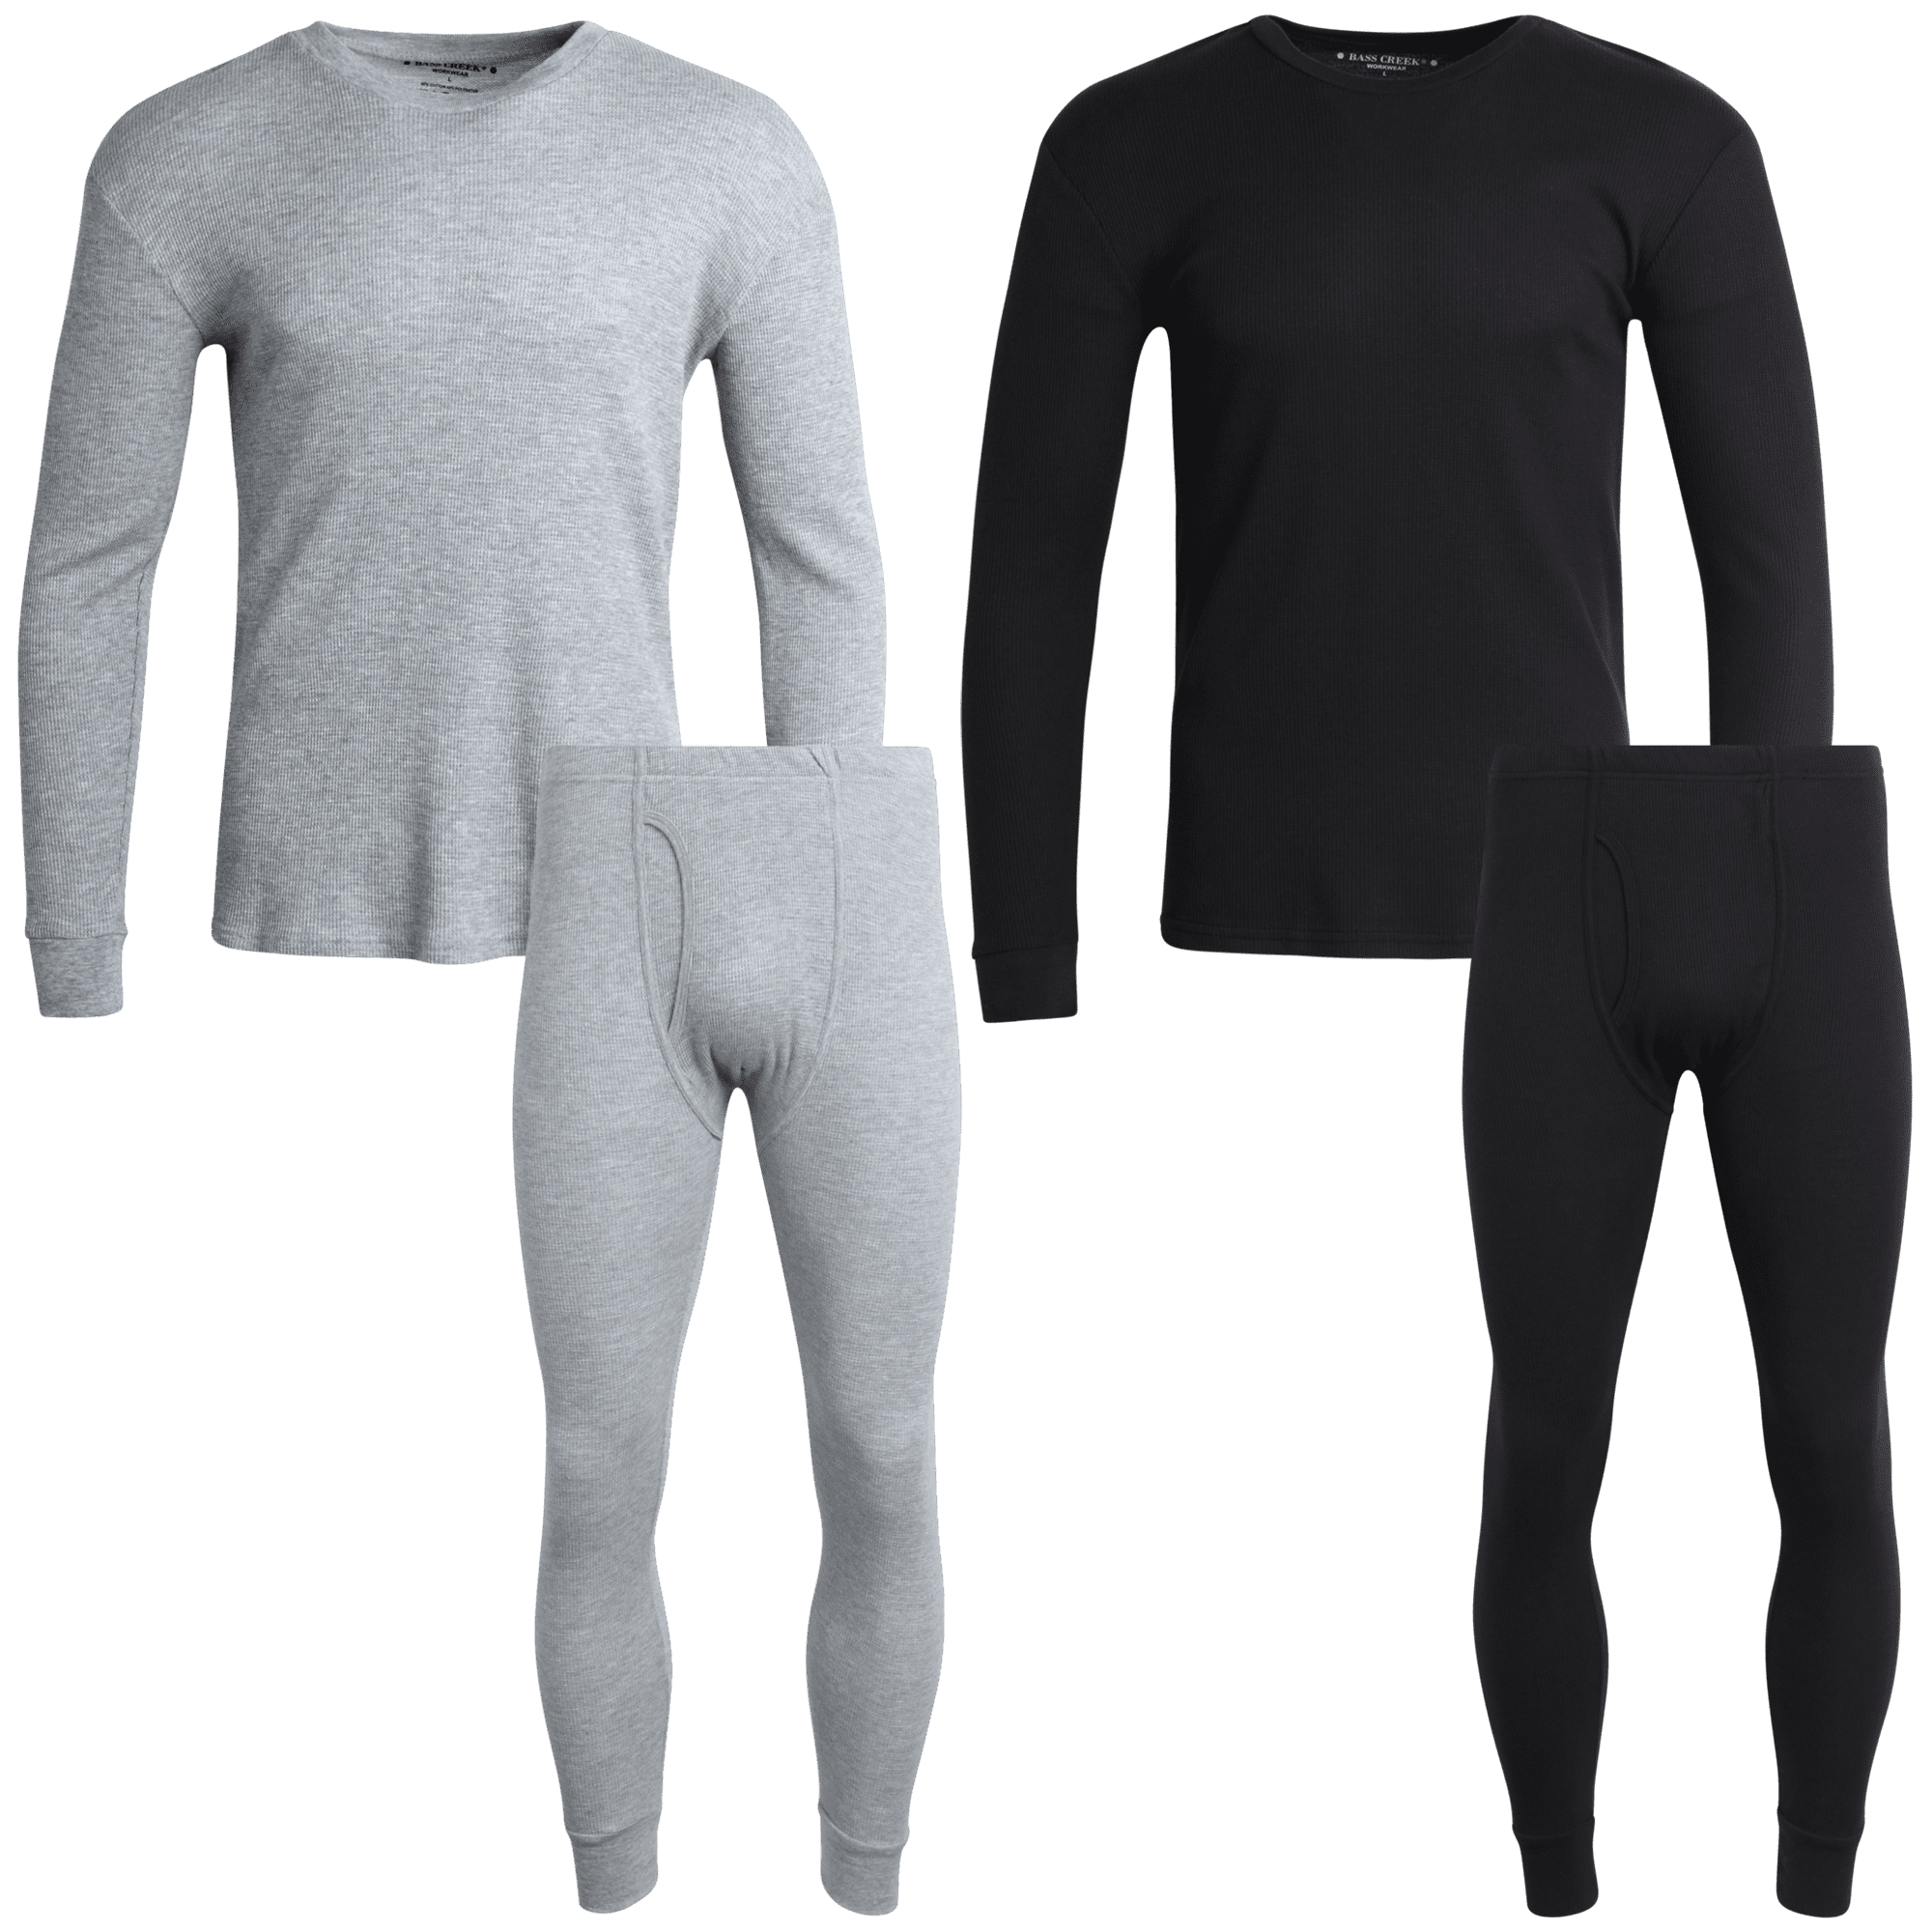 Bass Creek Outfitters Men's Thermal Underwear Set - 4 Piece Waffle Knit ...